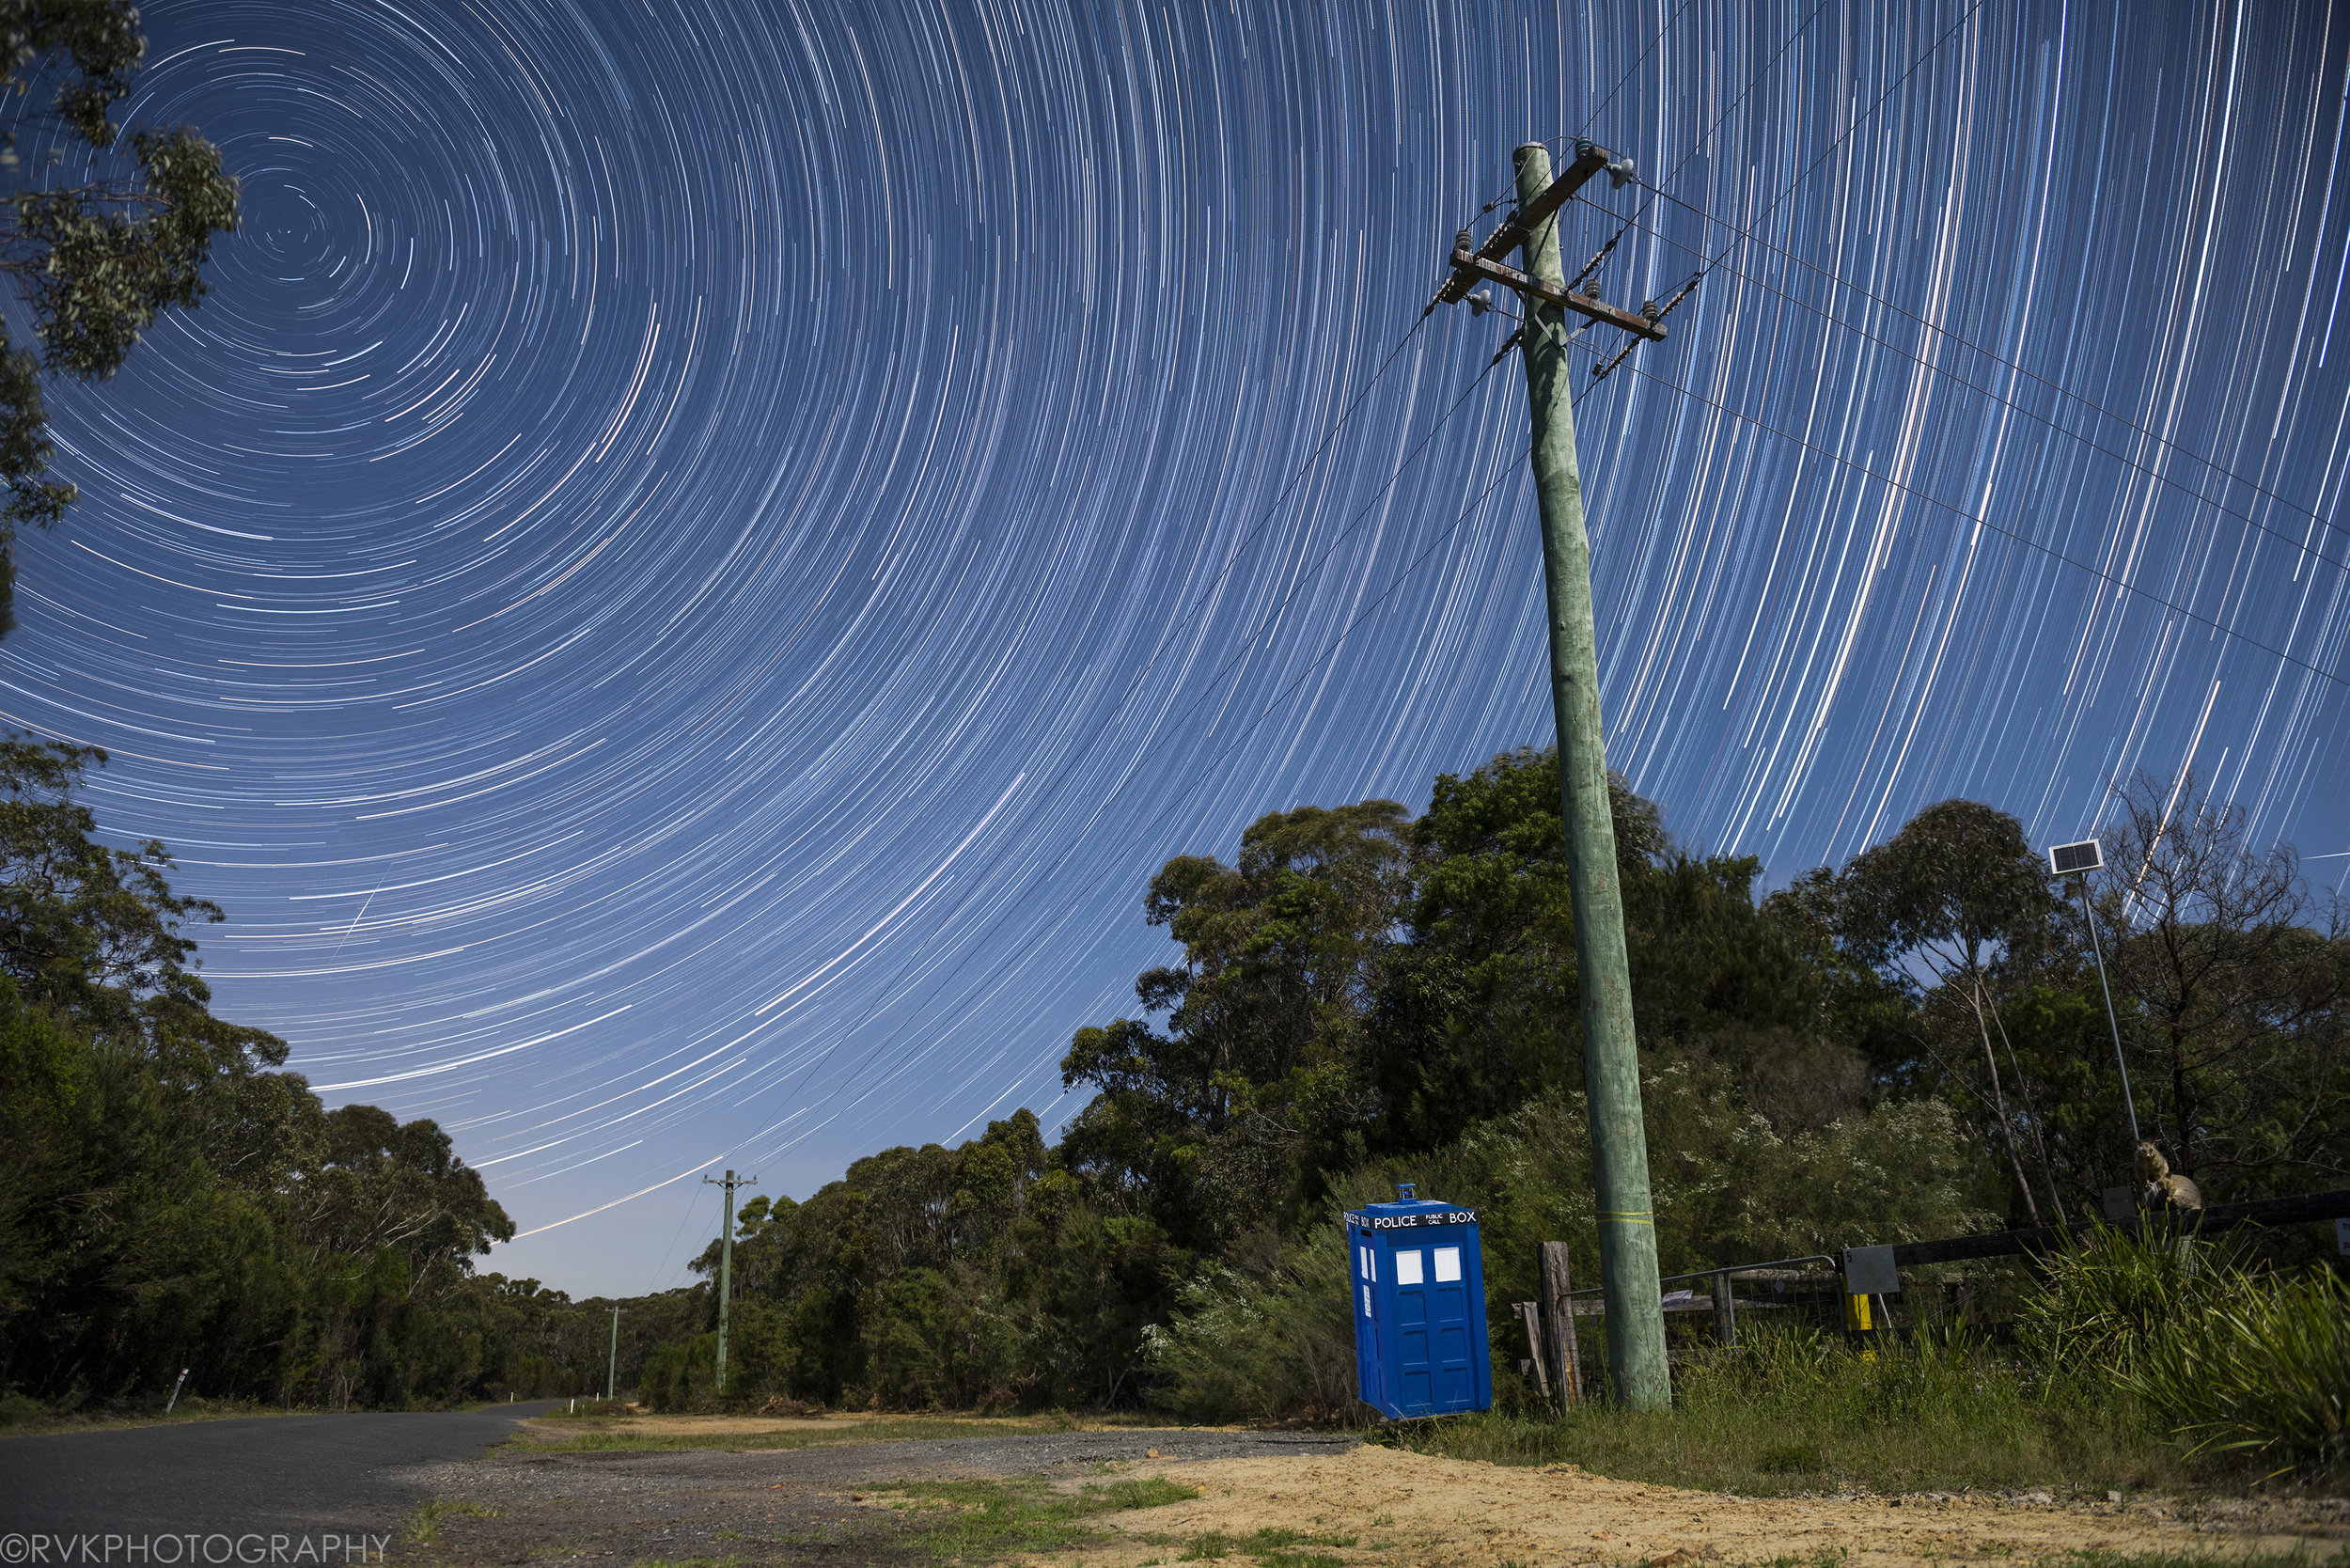 The night sky is filled with the swirls of star trails, and the foreground has a bright blue TARDIS police box with some possums sitting on the fence